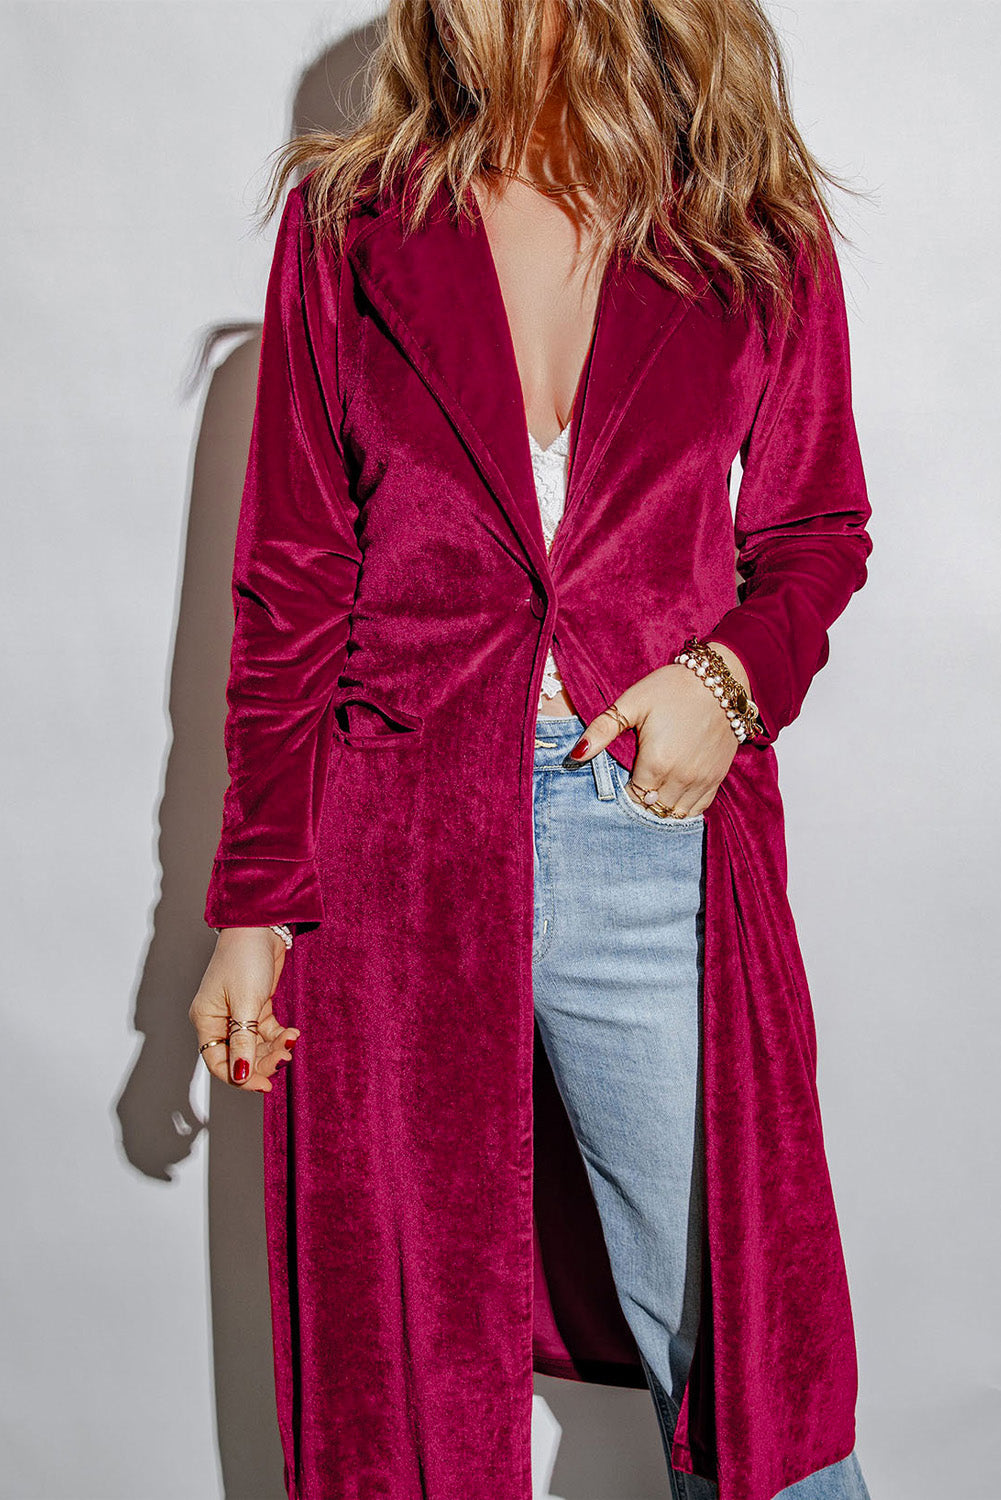 Brown Collared Neck Longline Velvet Cardigan with Pockets Sentient Beauty Fashions Apparel & Accessories